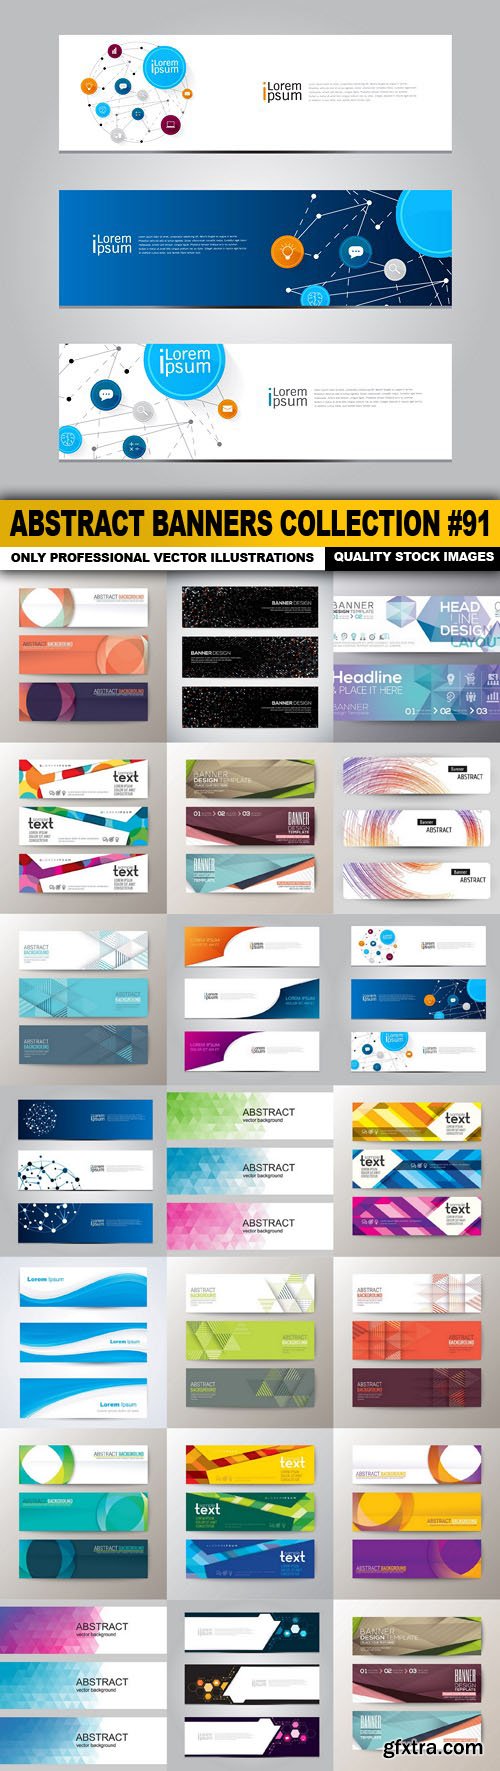 Abstract Banners Collection #91 - 20 Vectors